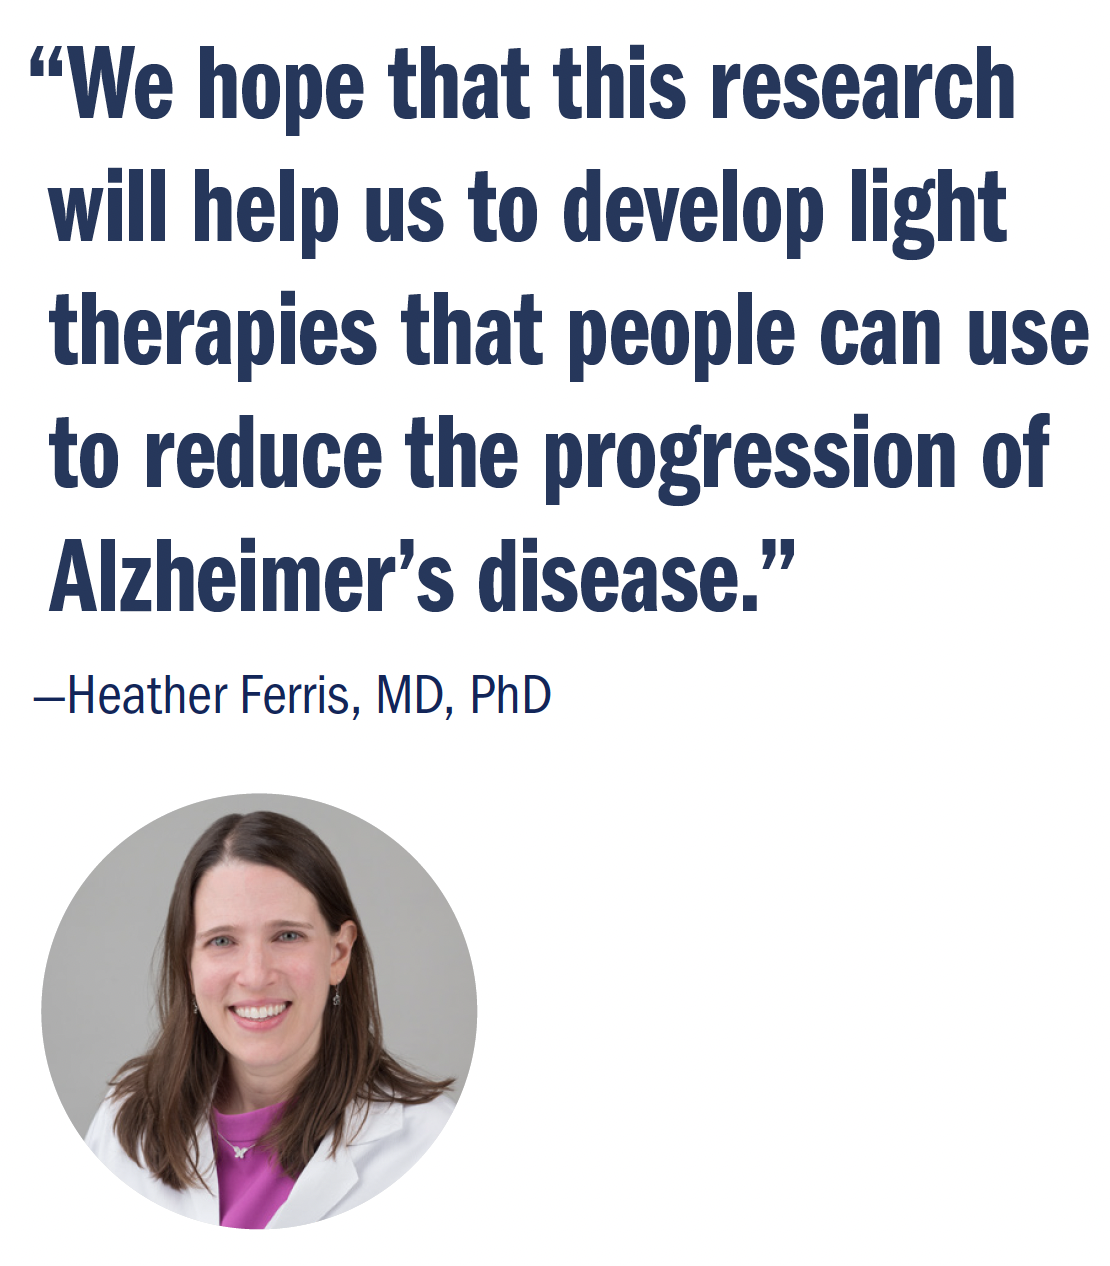 quote from dr. faris: “We hope that this research will help us to develop light therapies that people can use to reduce the progression of Alzheimer’s disease.”